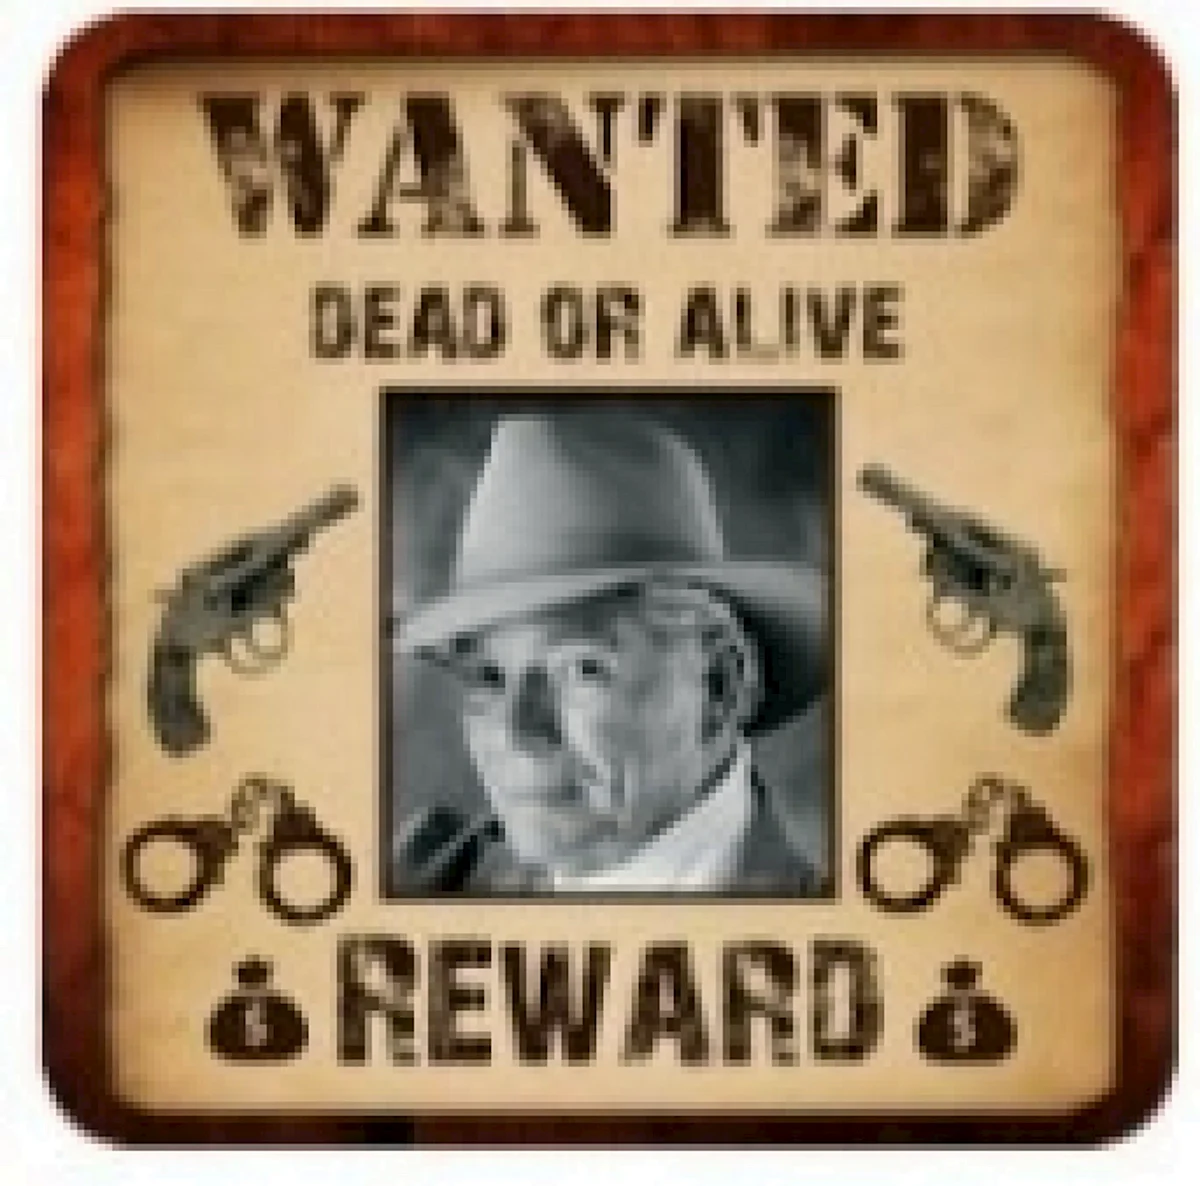 Wanted дикий Запад